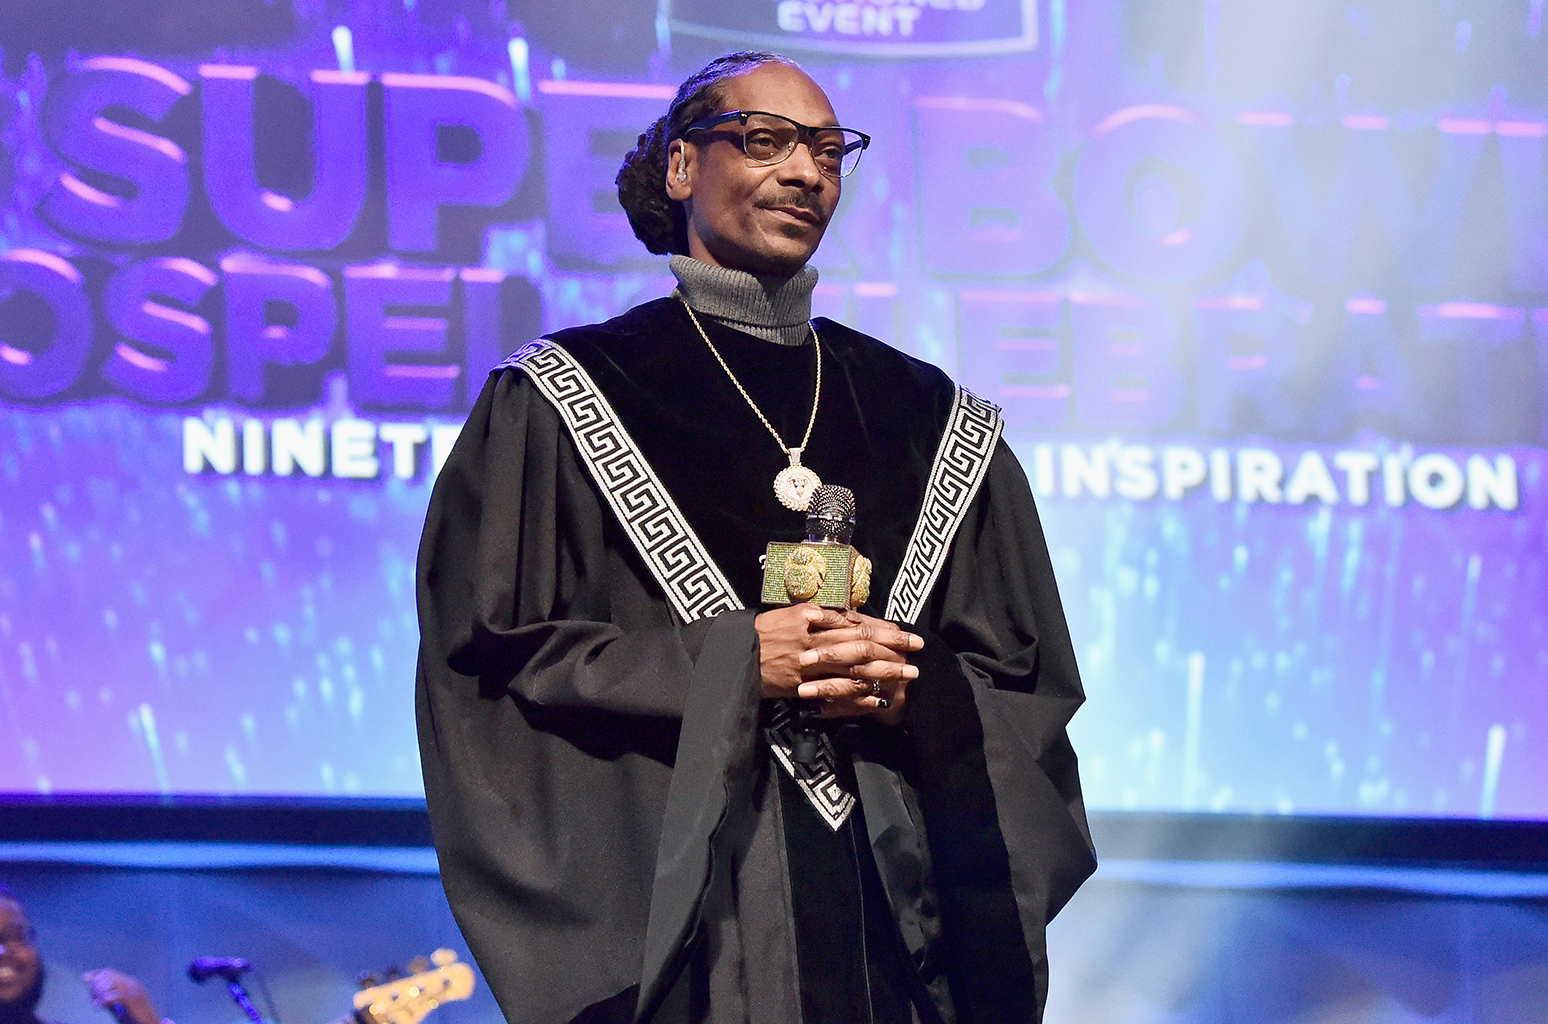 ST PAUL, MN - FEBRUARY 01:  Snoop Dogg performs onstage during BET Presents 19th Annual Super Bowl Gospel Celebration at Bethel University on February 1, 2018 in St Paul, Minnesota.  (Photo by Frazer Harrison/Getty Images for BET)